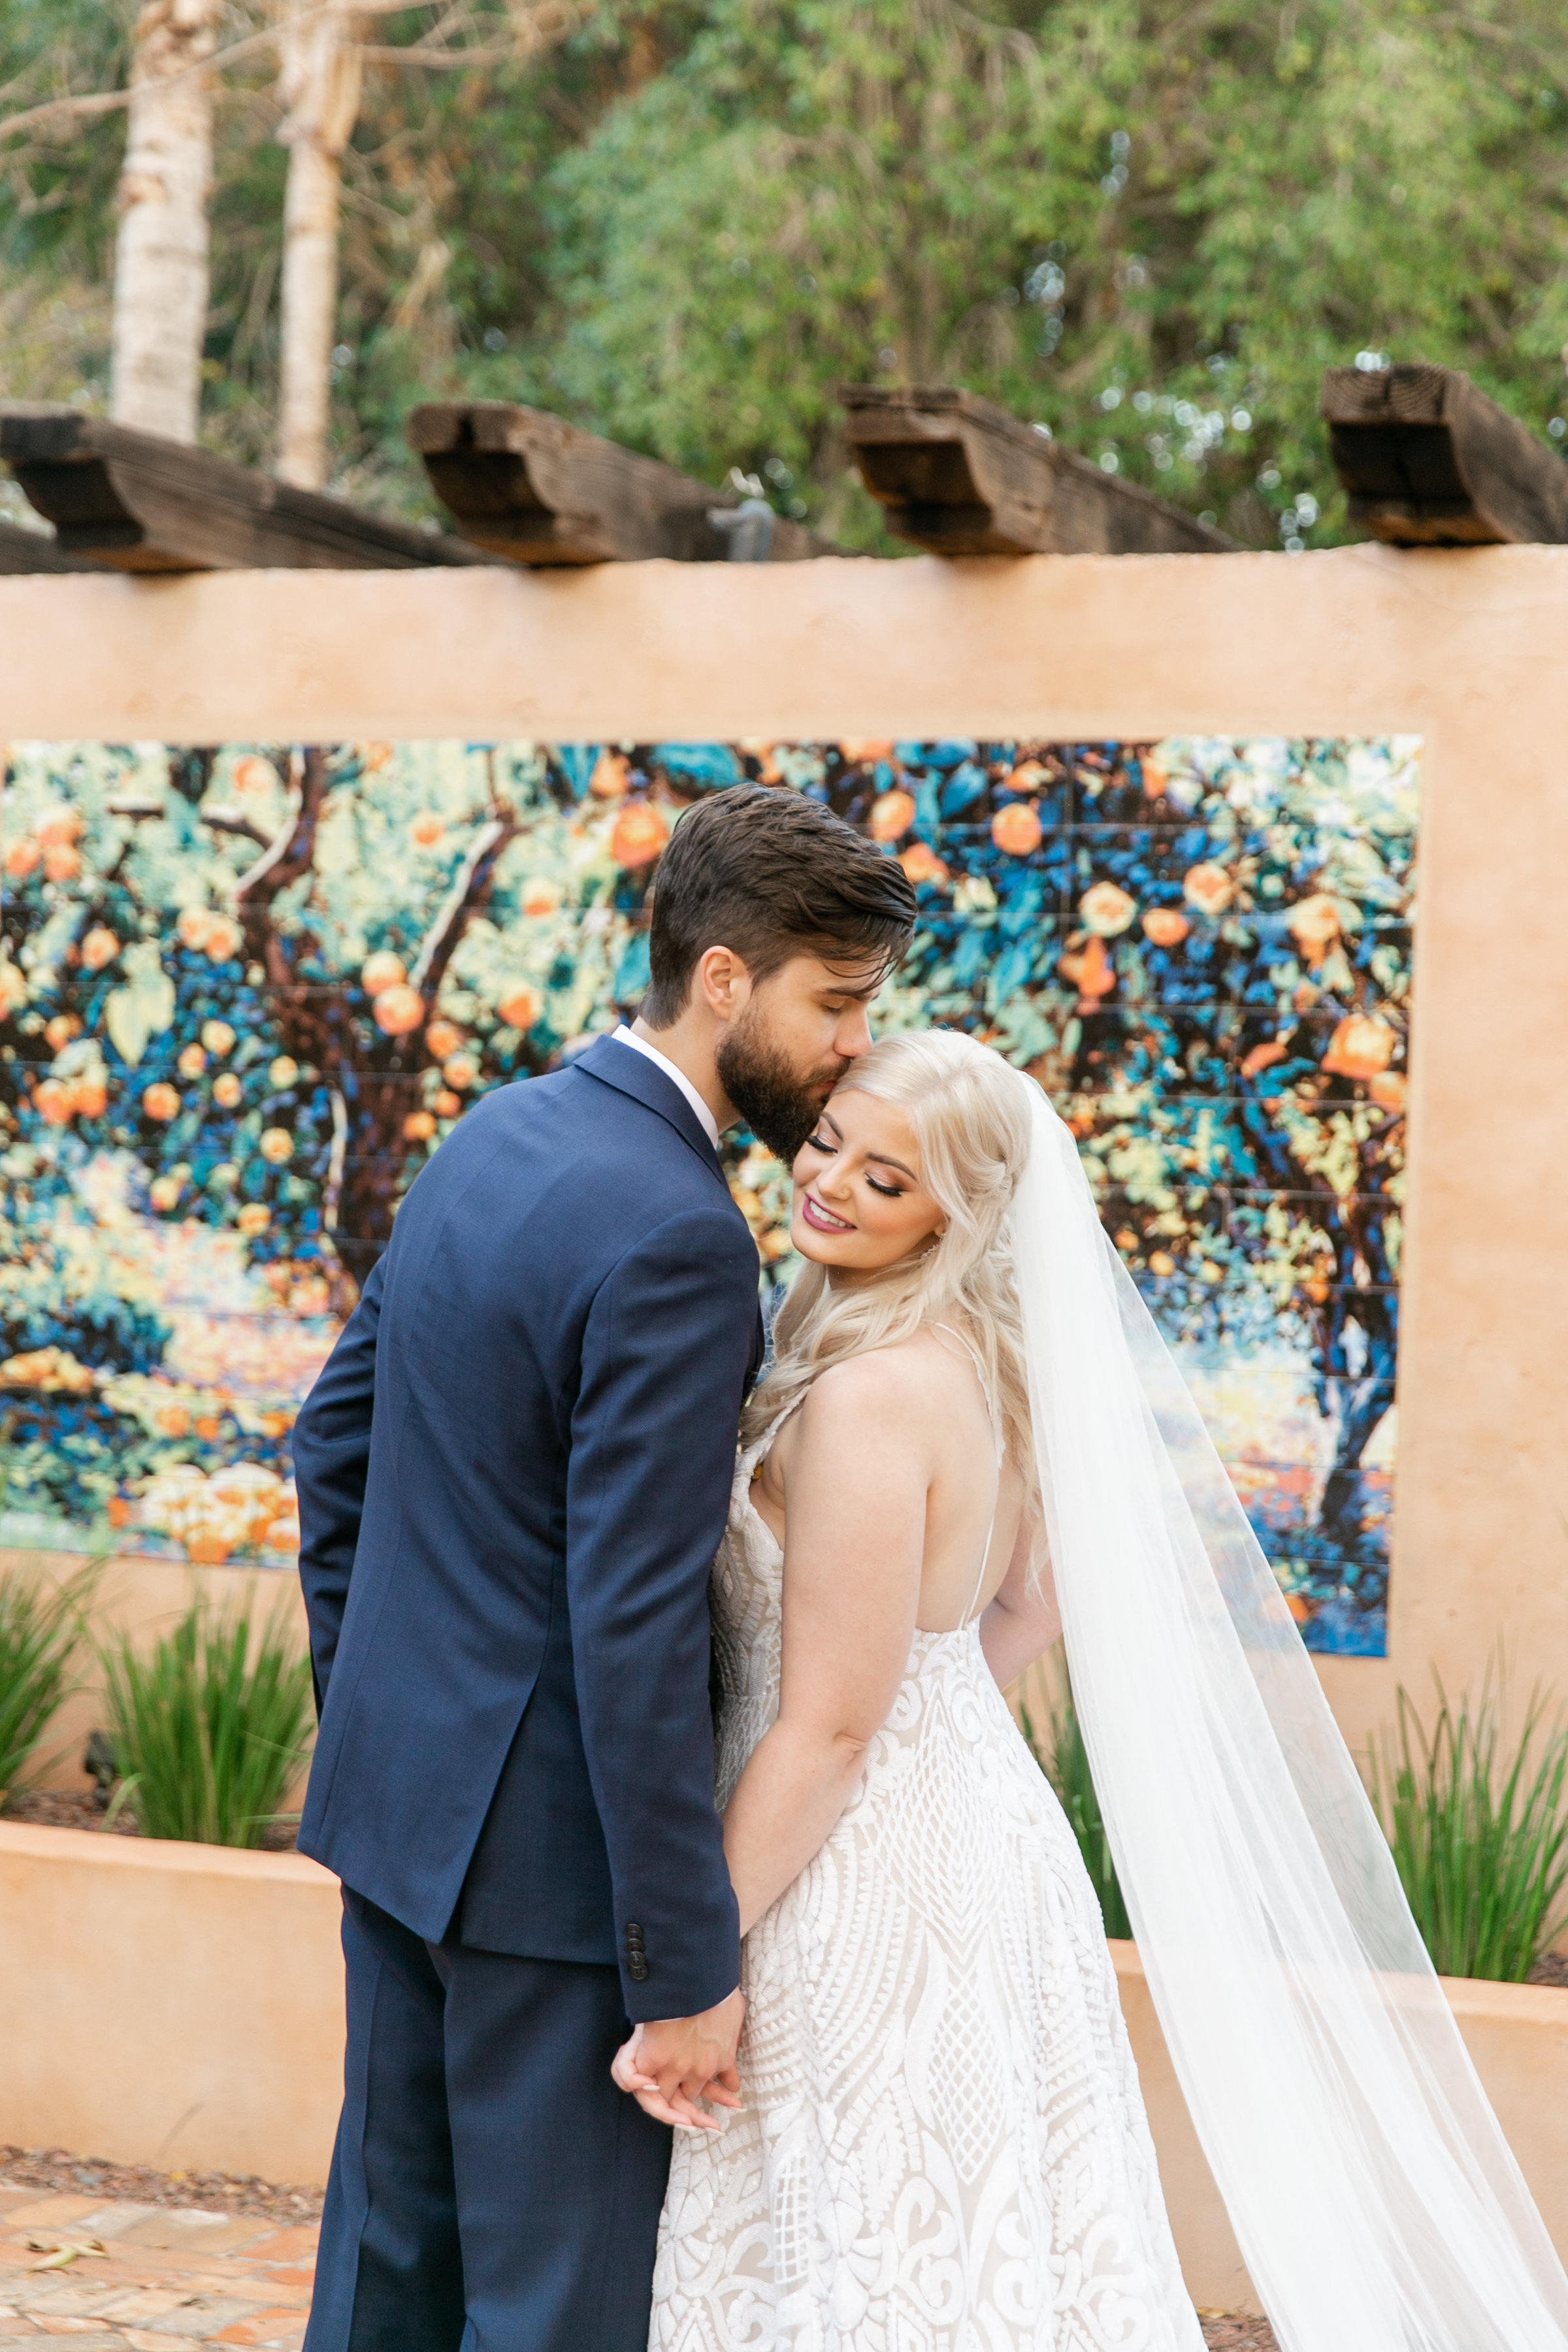 Karlie Colleen Photography - The Royal Palms Wedding - Some Like It Classic - Alex & Sam-526